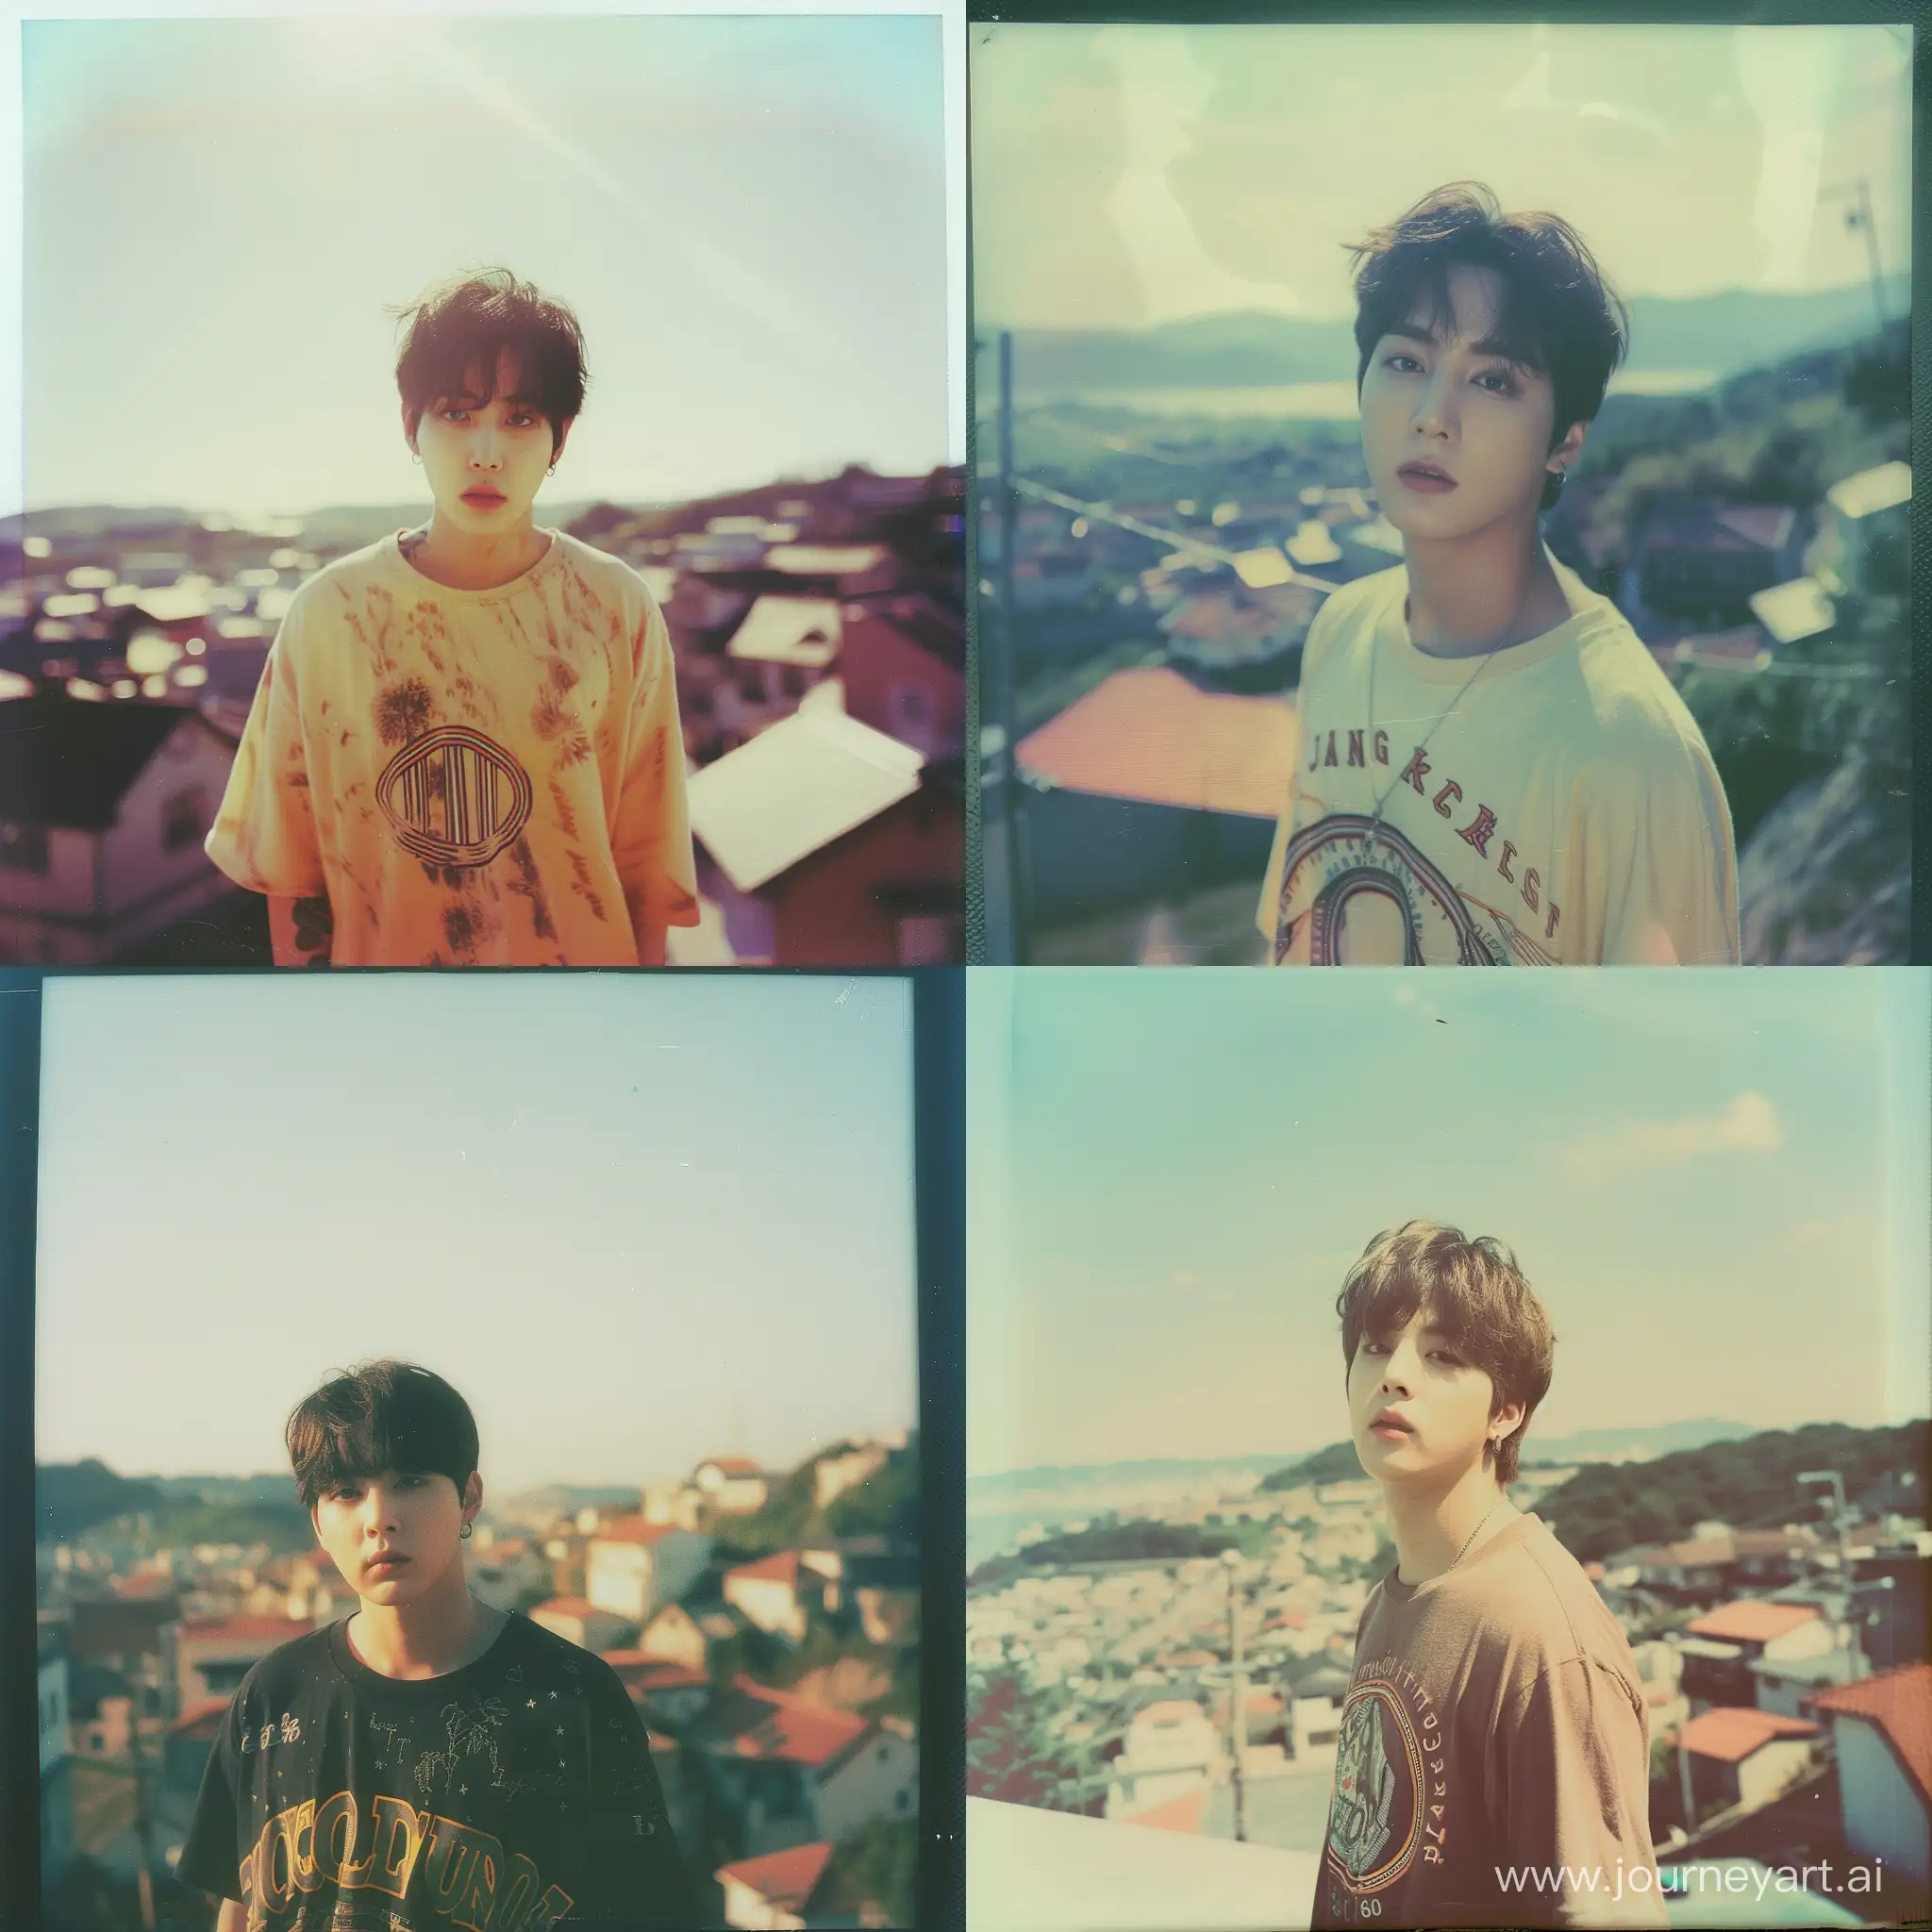 vintage polaroid/film photo of a jungkook wearing ringer tee shirt against little town at sunny day, polaroid 600 film, depth of field, soft and dreamy tones.